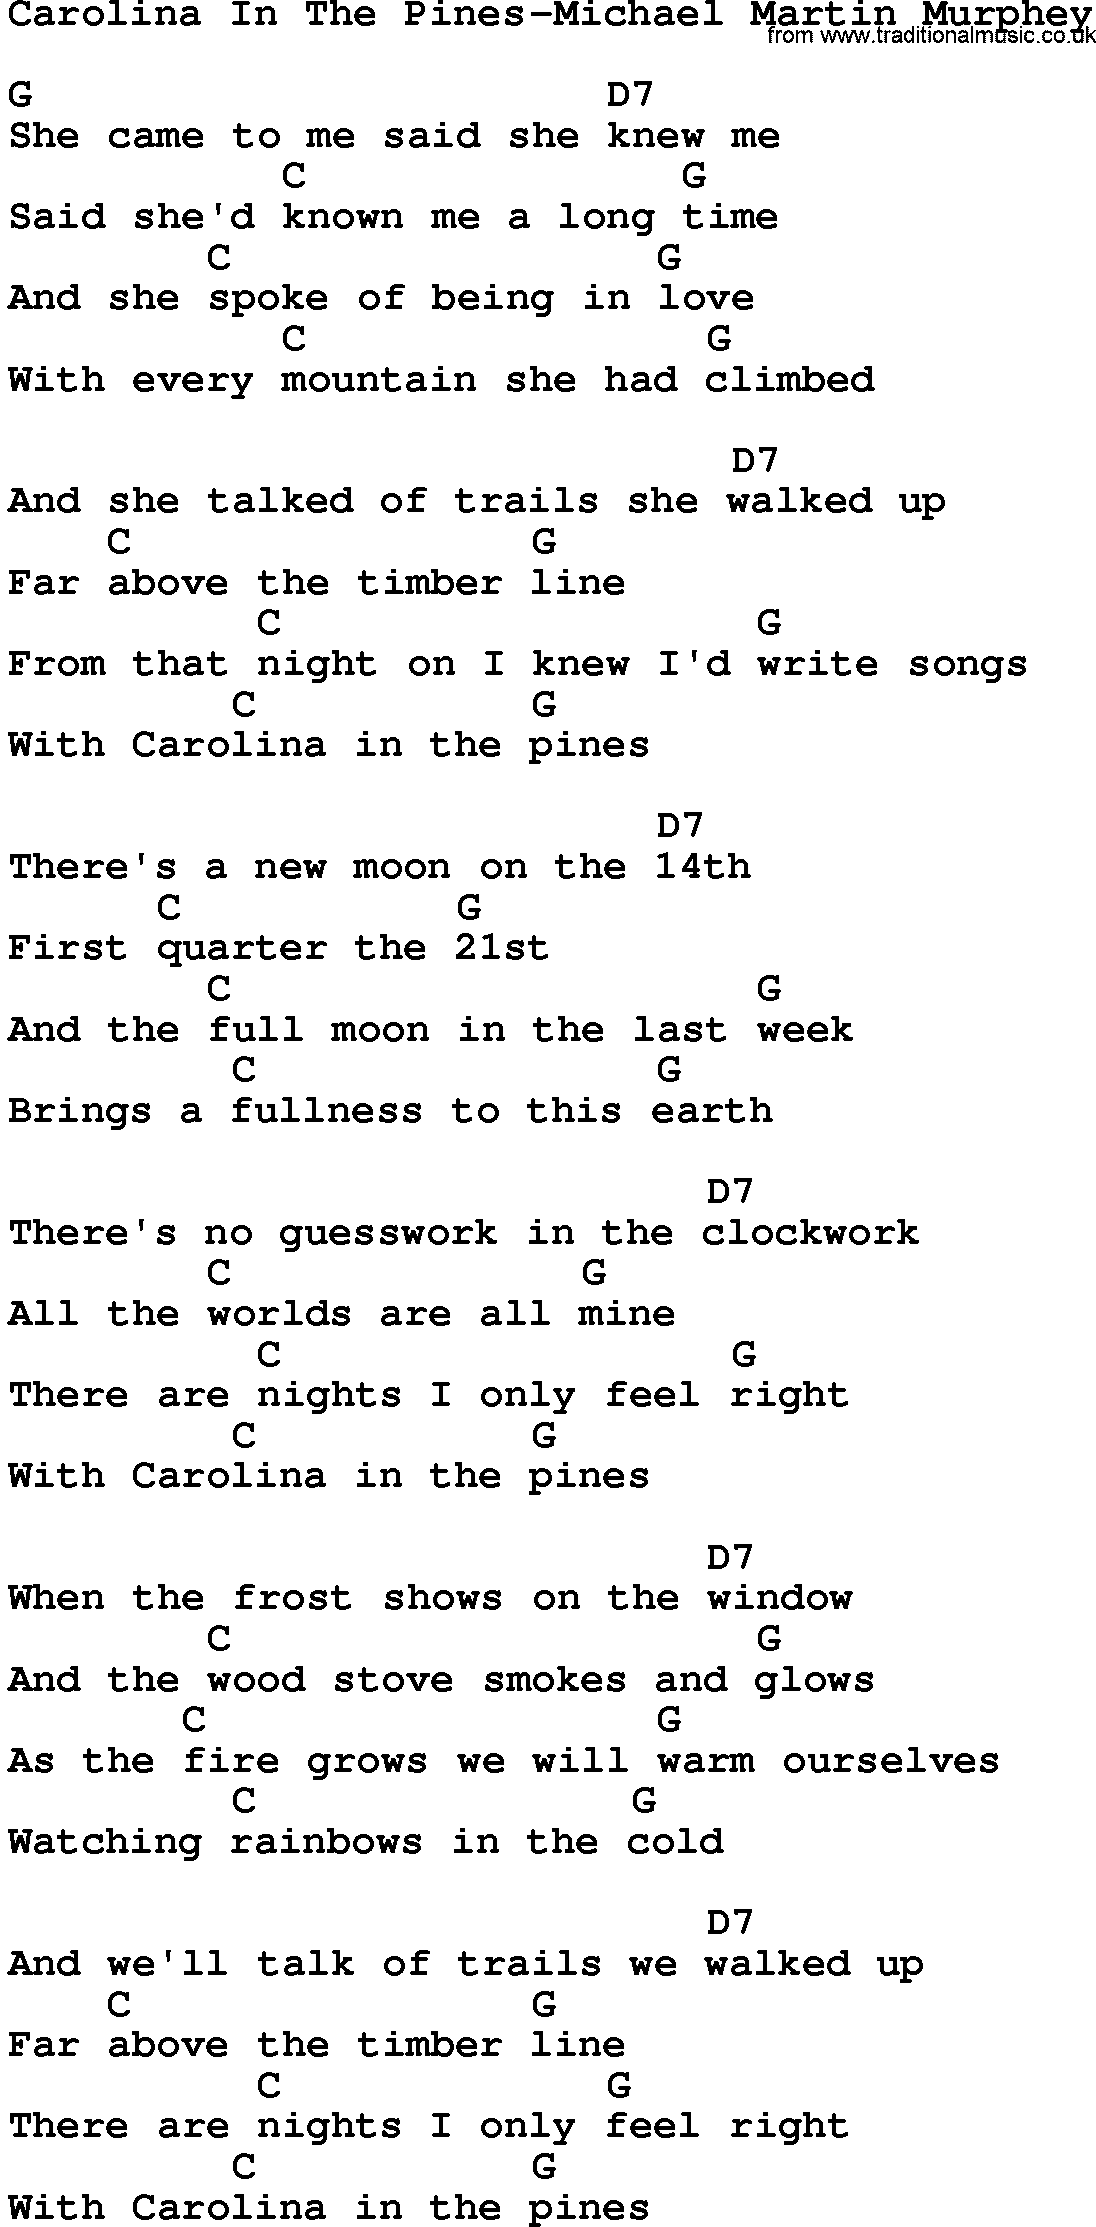 Country music song: Carolina In The Pines-Michael Martin Murphey lyrics and chords